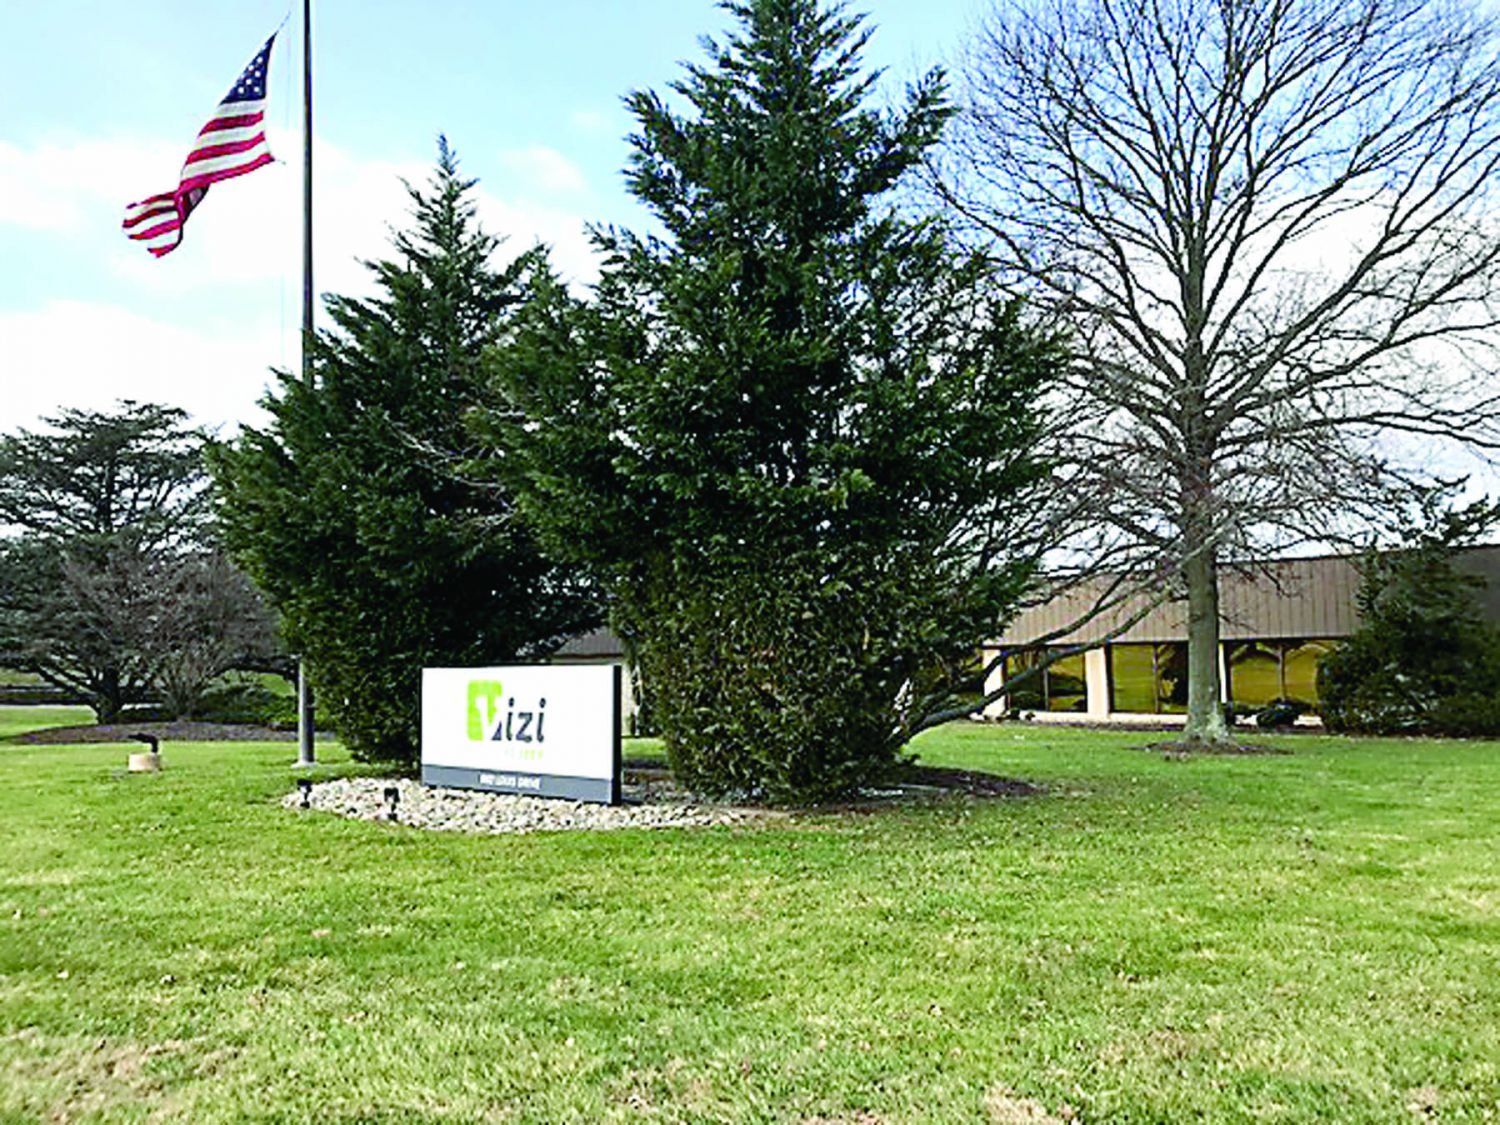 Vizi headquarters, with its new sign out front, at 882 Louis Drive, Warminster.